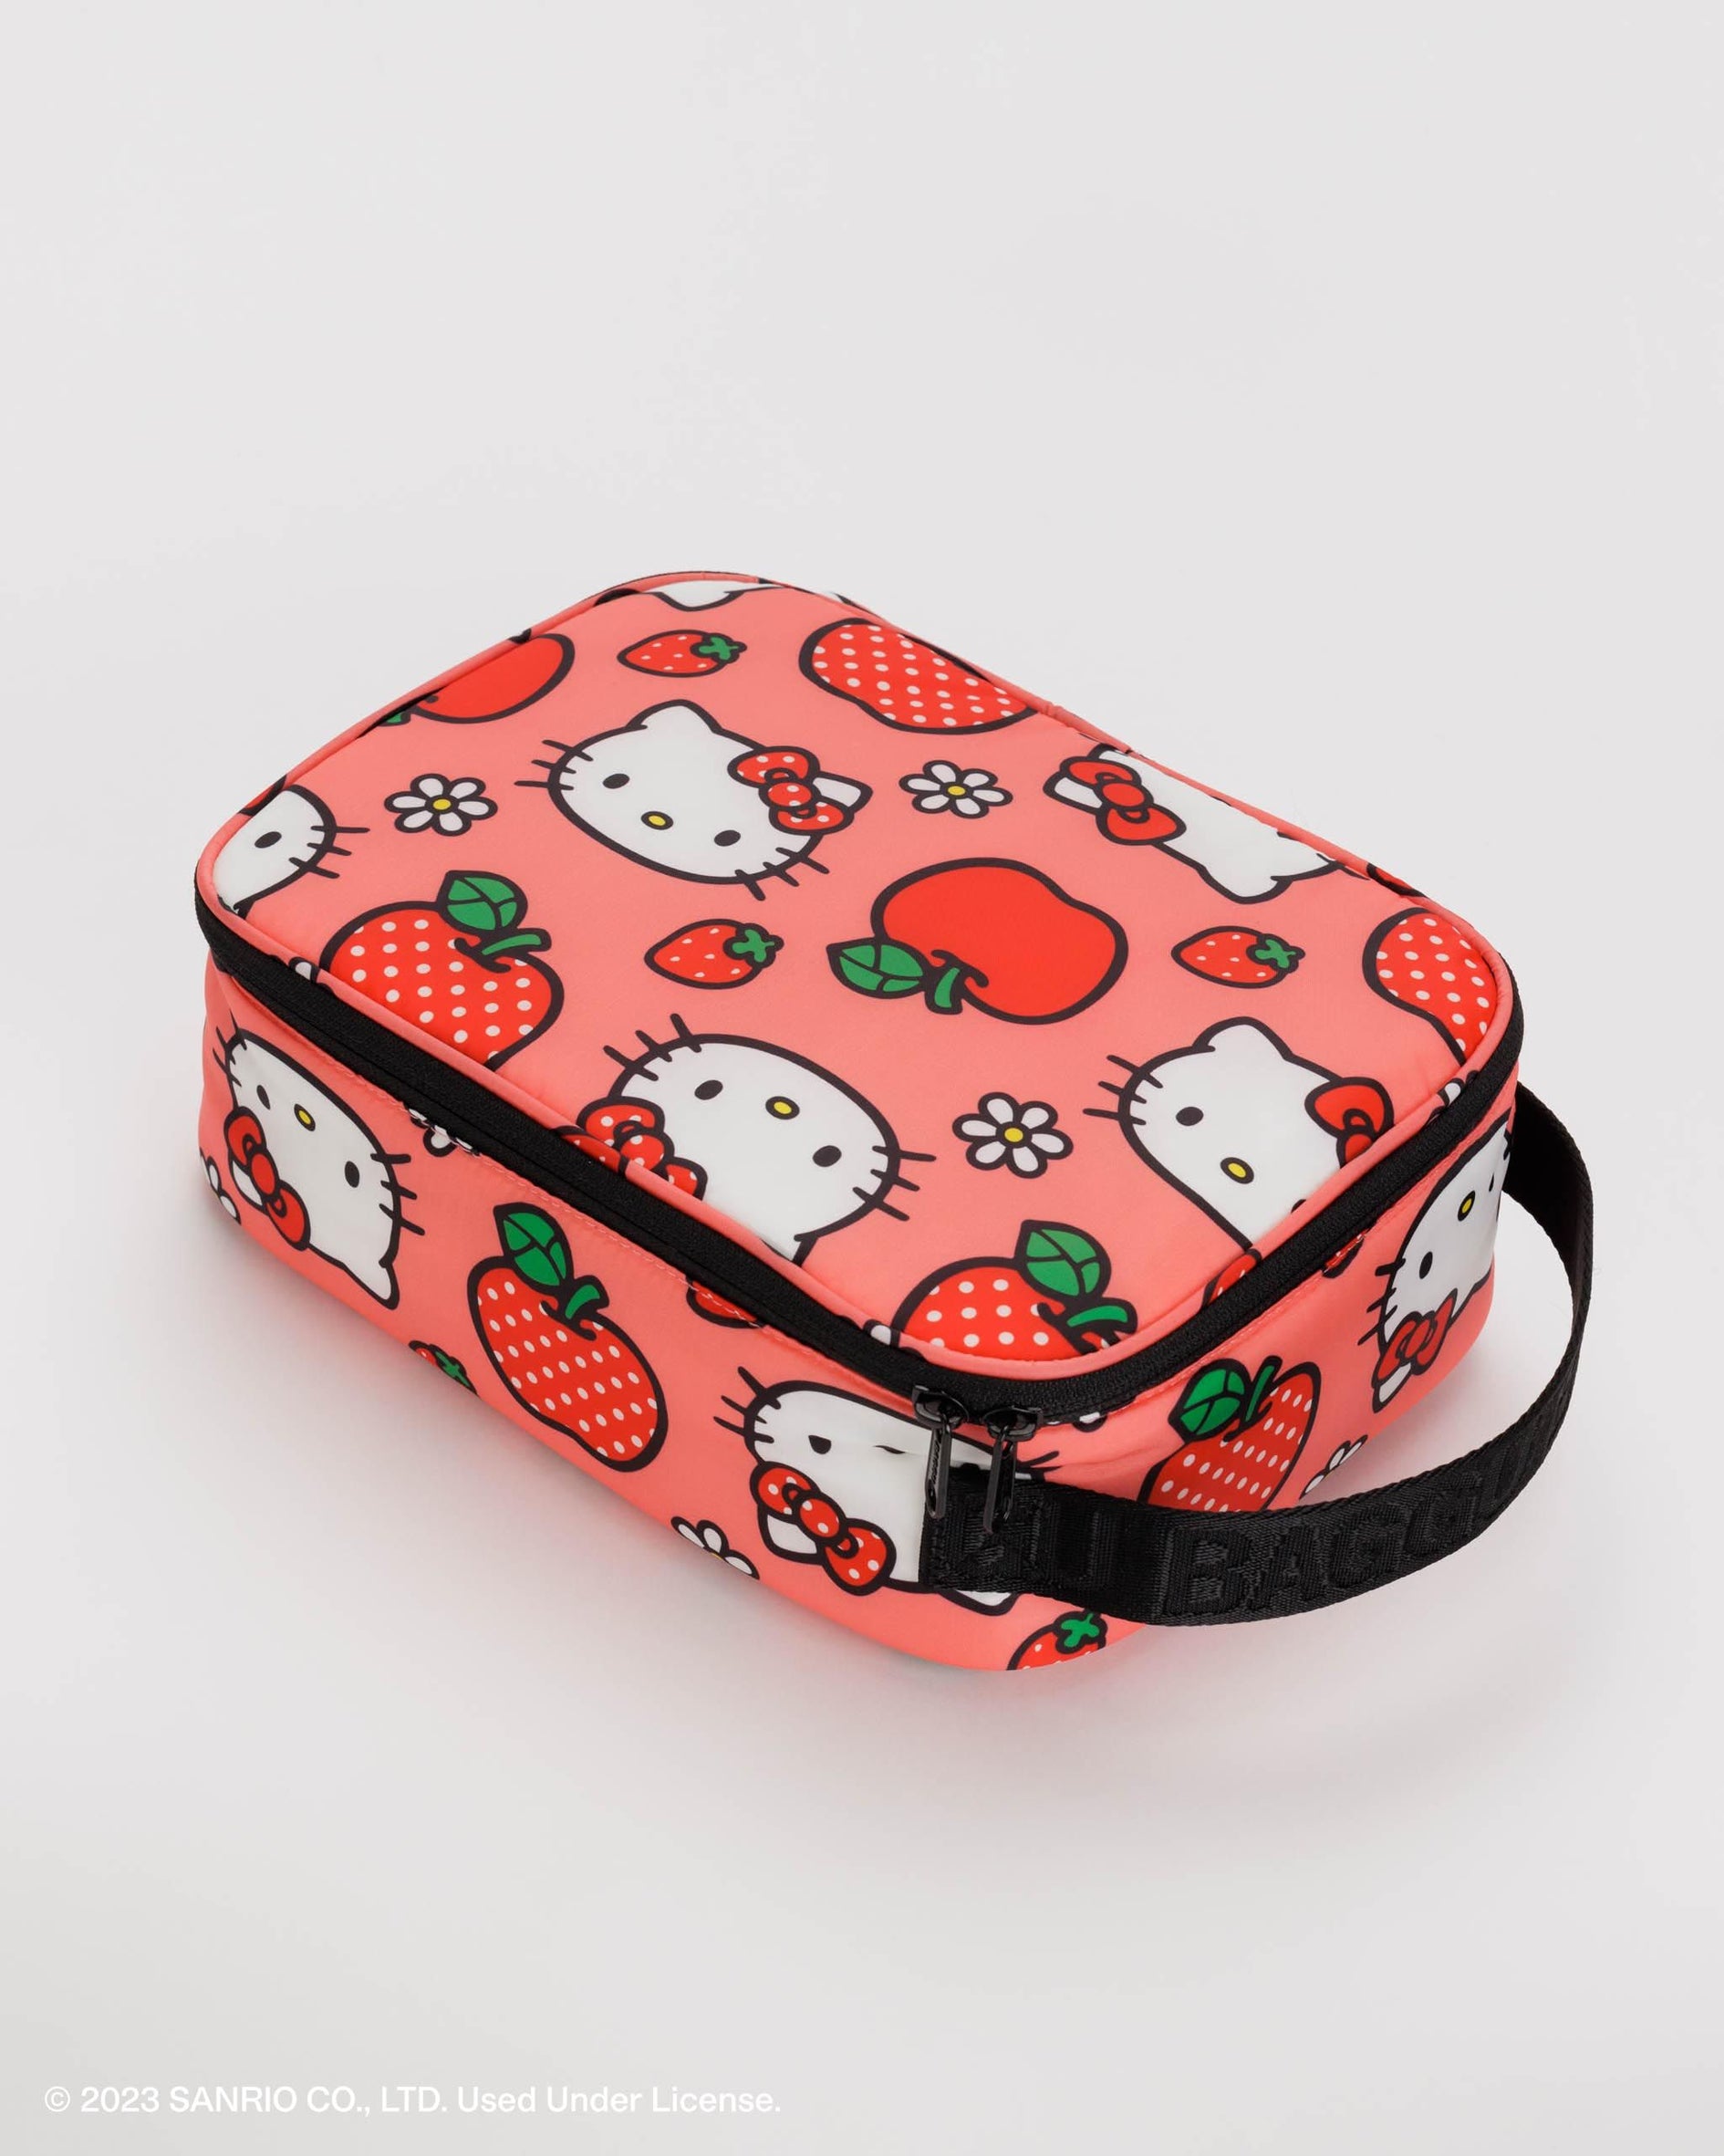 Hello Kitty - Pink Apple Lunch Box with Dividers